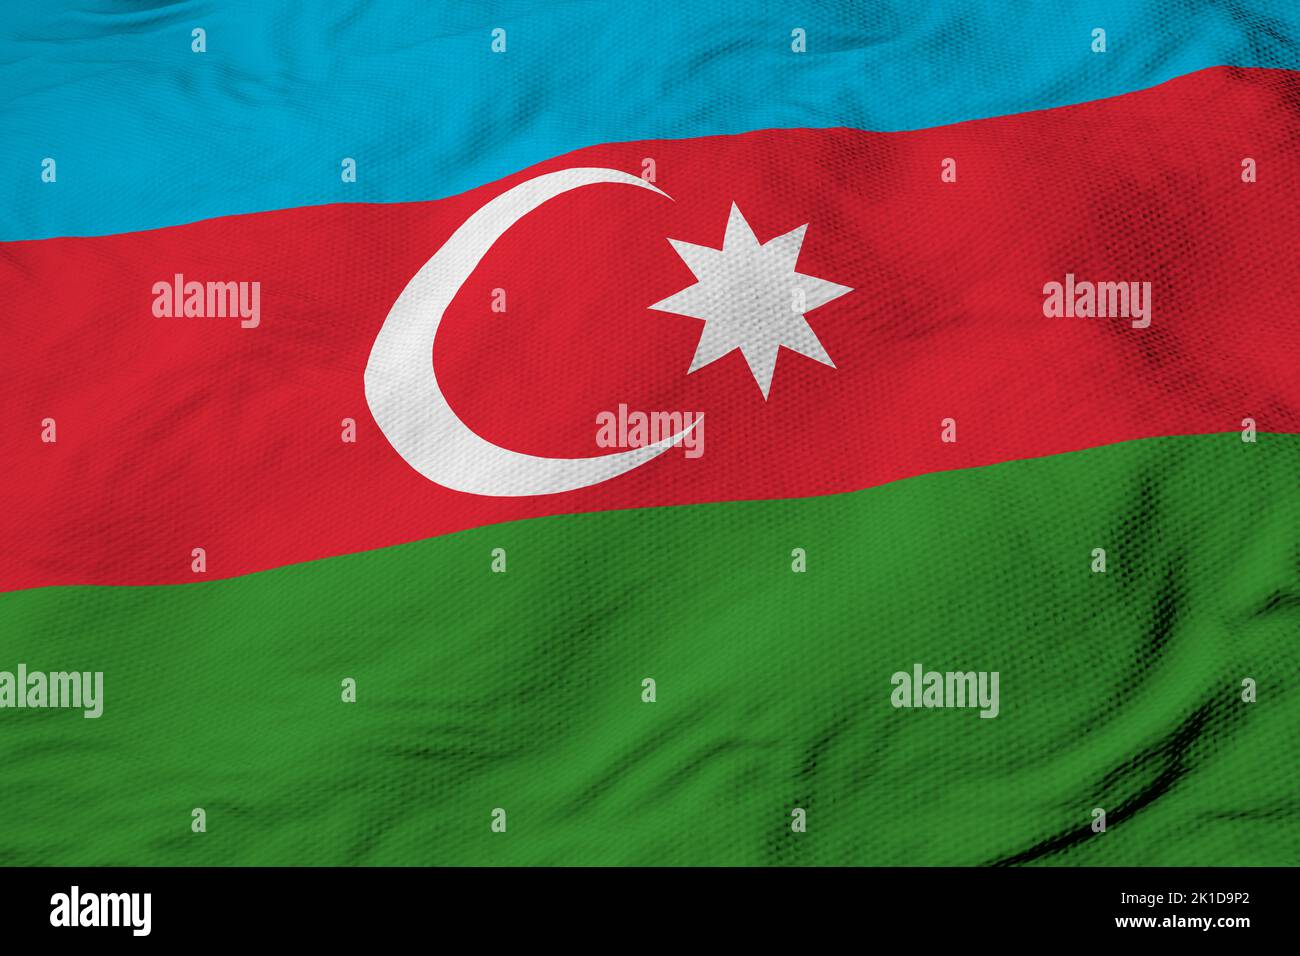 Full frame close-up on a waving Flag of Azerbaijan in 3D rendering. Stock Photo